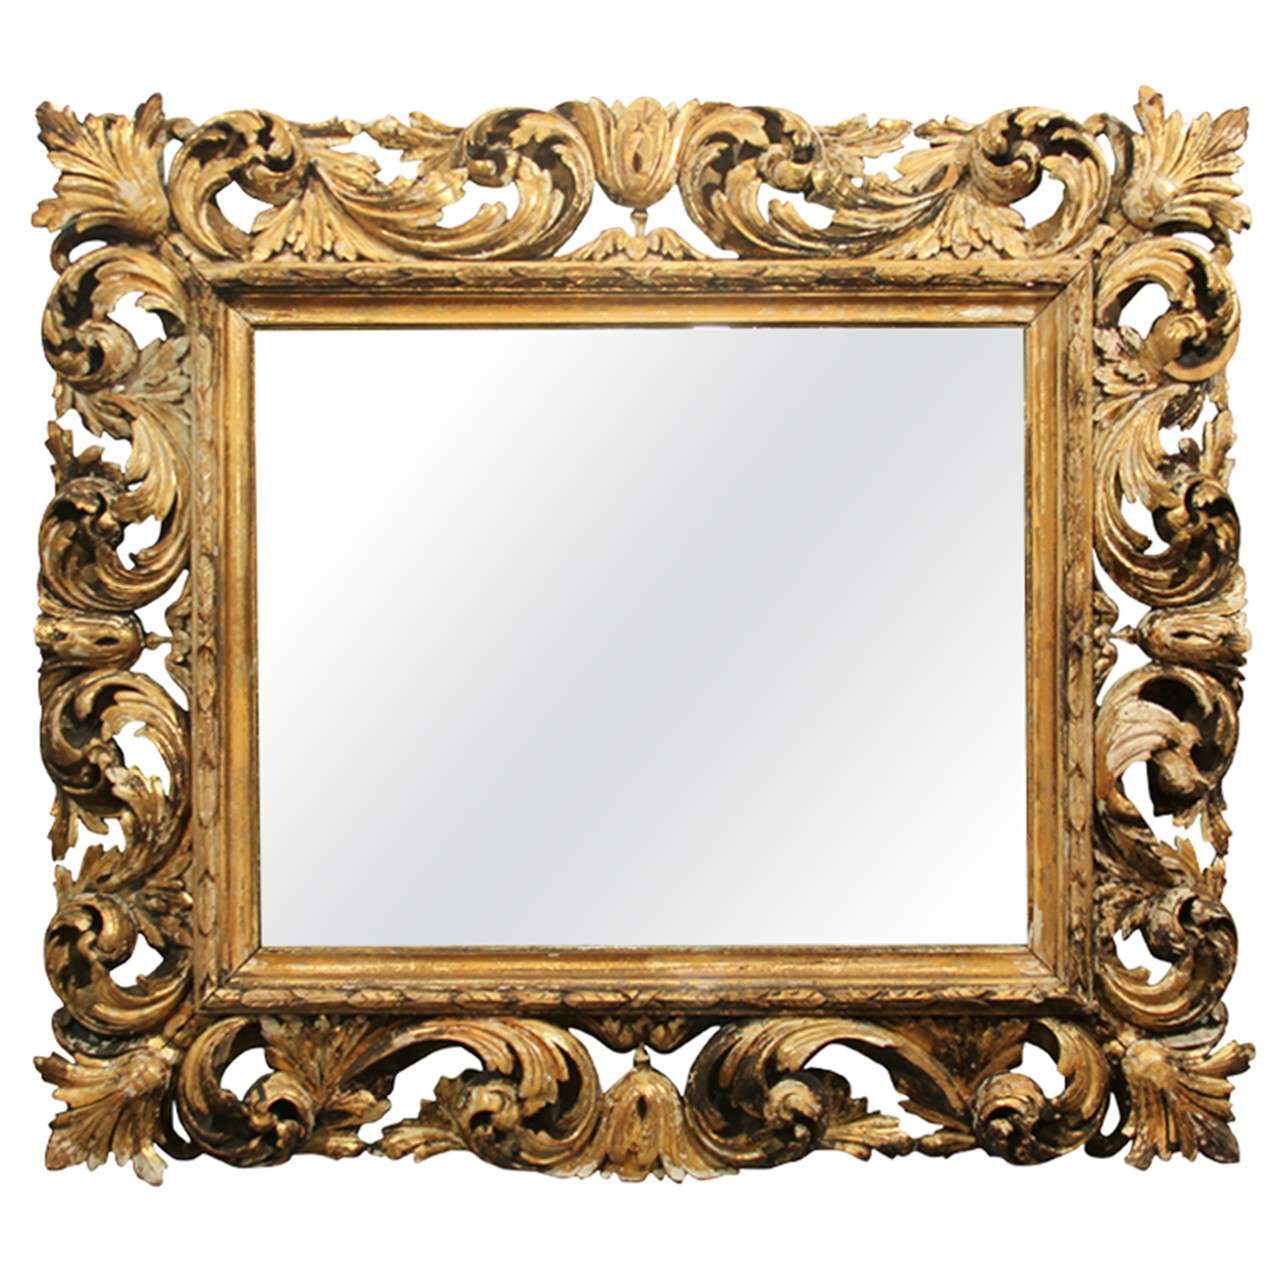 hand carved wood frame mirror